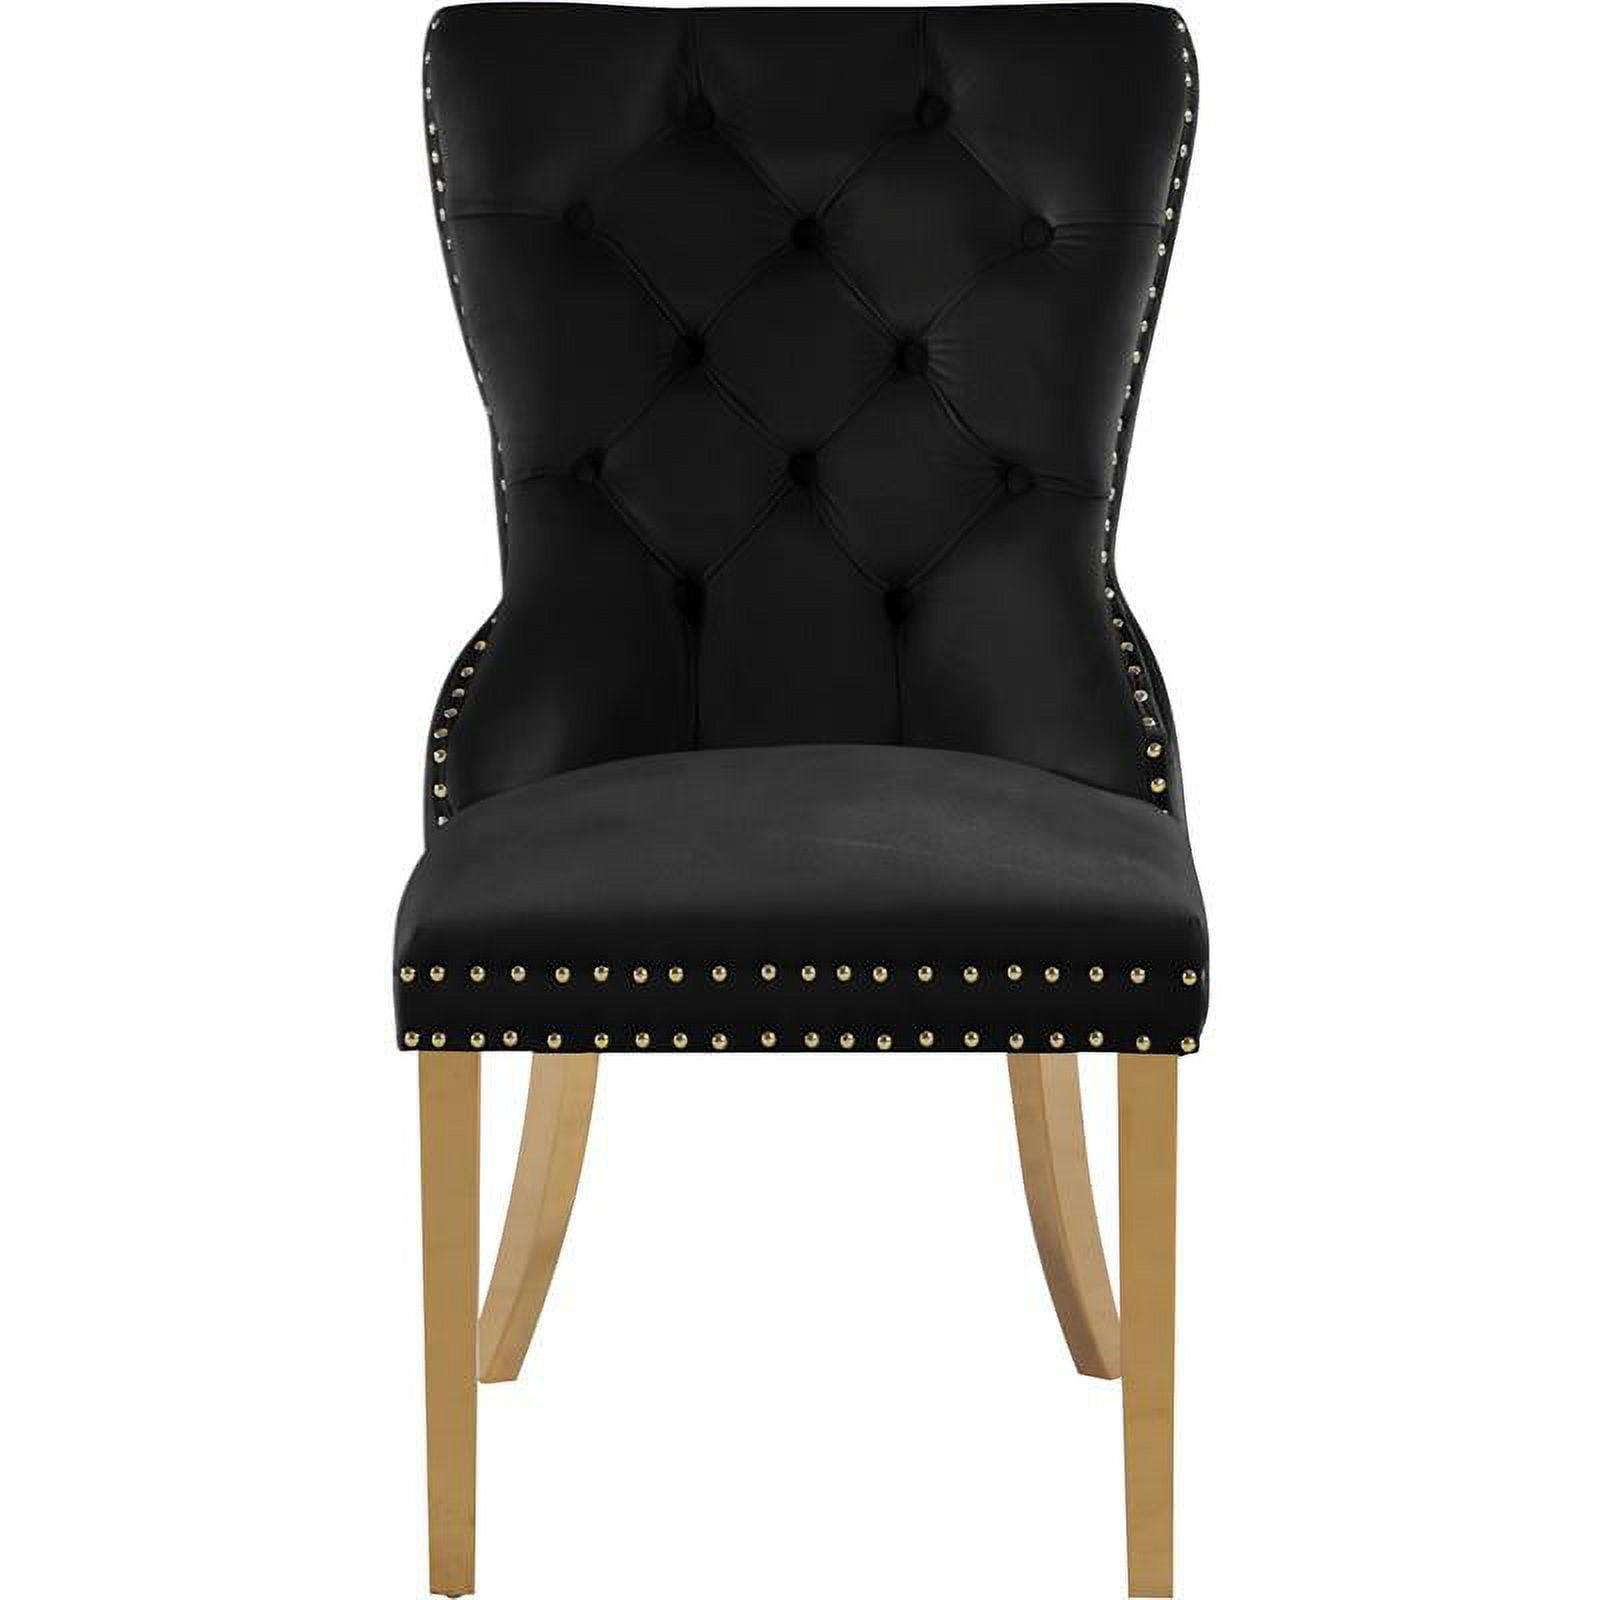 Luxurious Black Velvet 27" Dining Chair with Gold Metal Accents